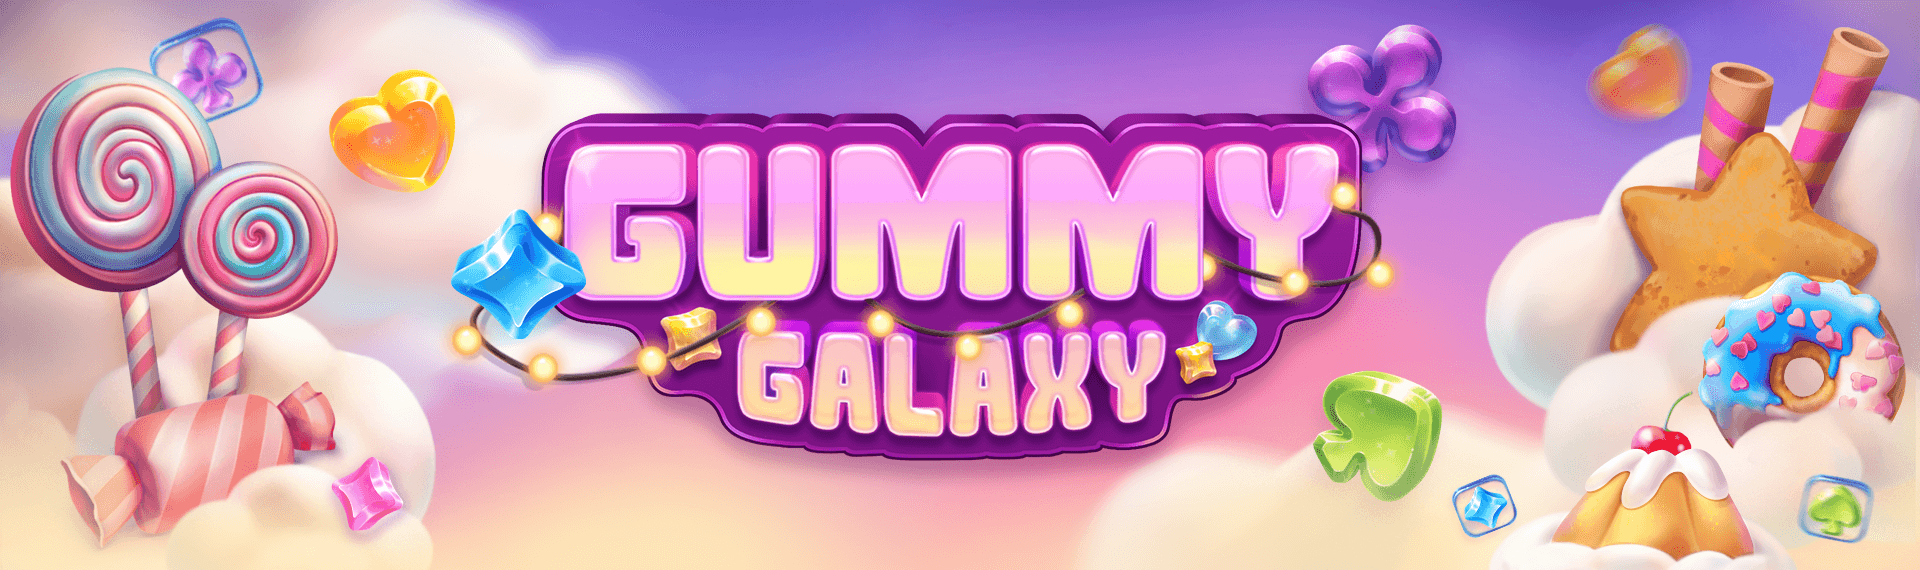 Gummy Galaxy Screenshot <br />
<b>Notice</b>:  Undefined variable: key in <b>/var/www/html/wp-content/themes/armadillo/page-game.php</b> on line <b>37</b><br />
1